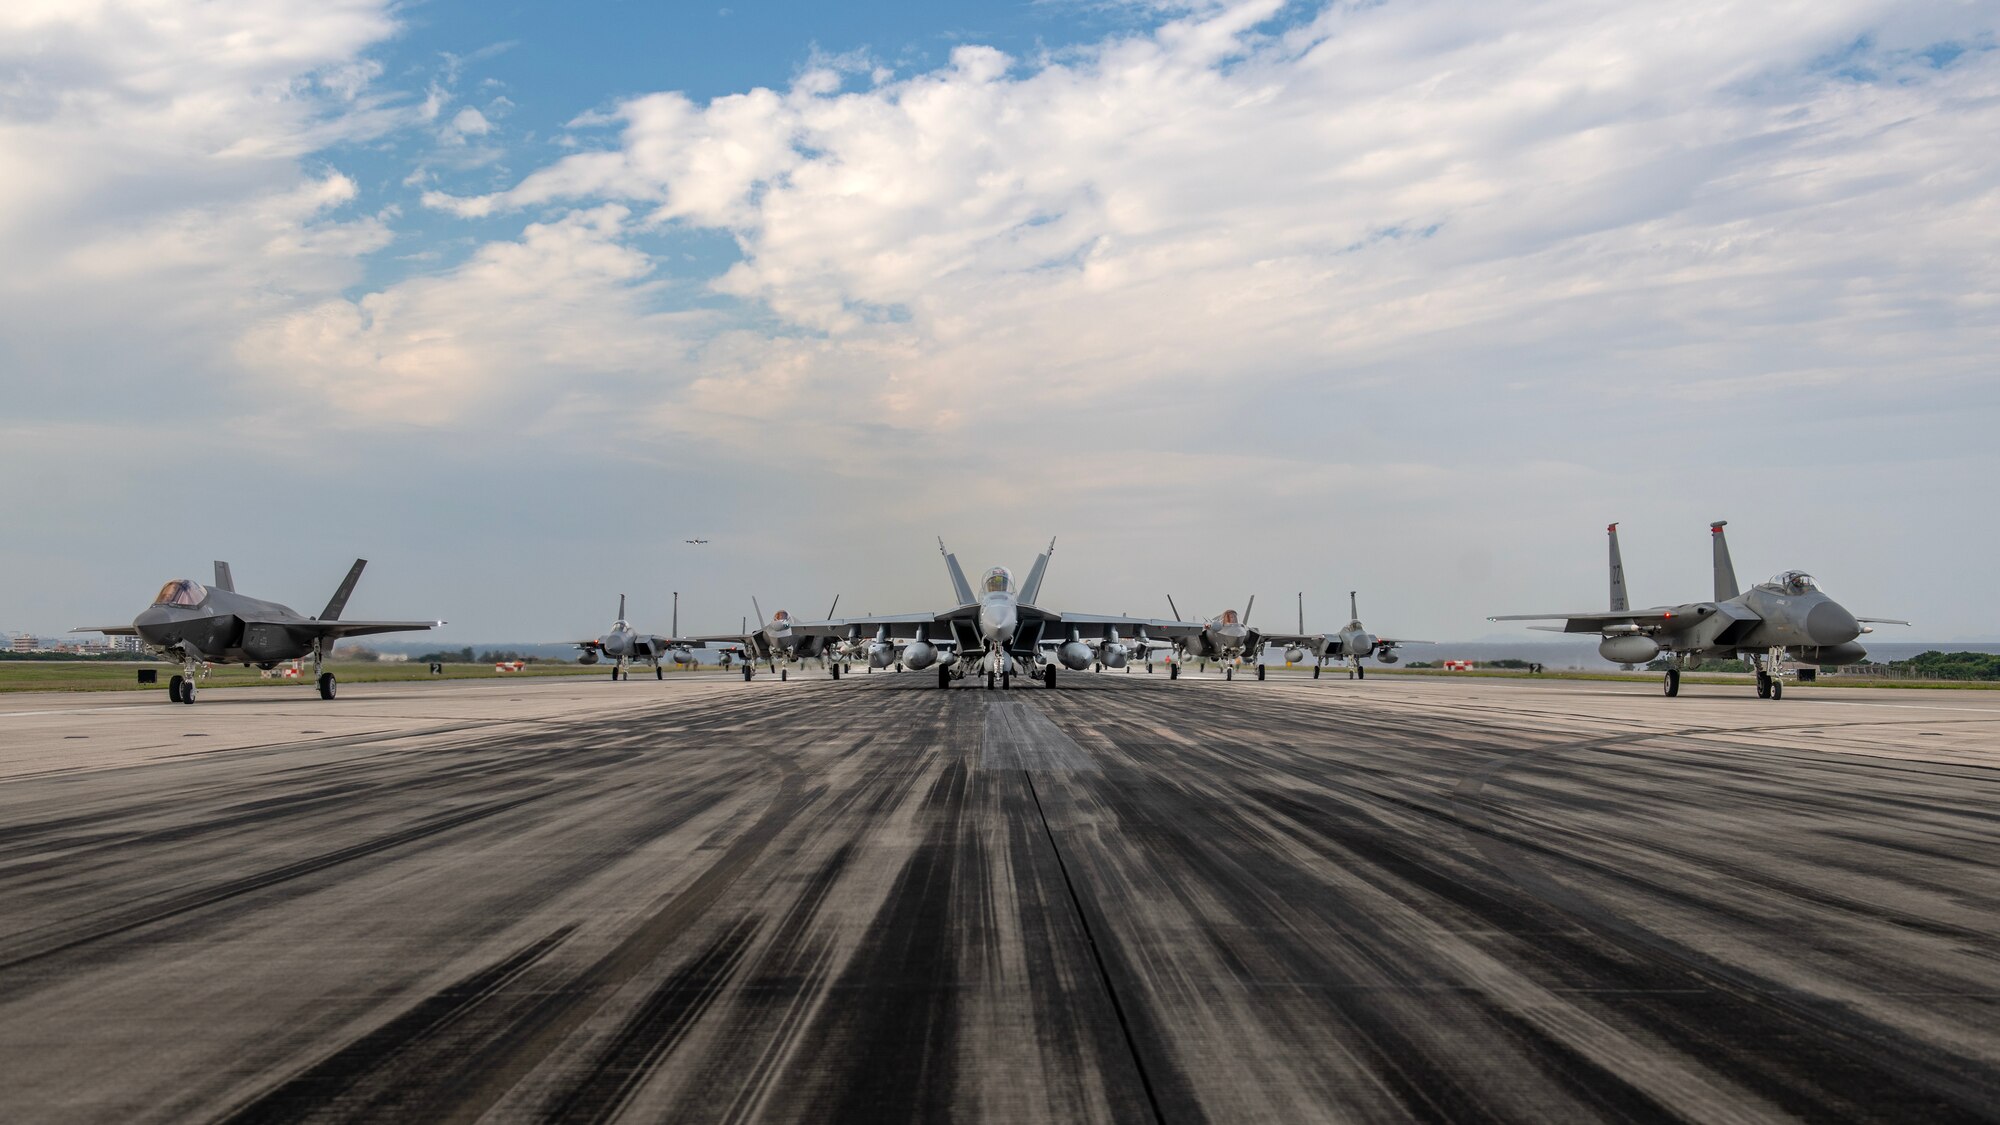 U.S. military aircraft line up on the runway during an elephant walk at Kadena Air Base, Japan, Nov. 21, 2023. Kadena’s ability to rapidly generate U.S. airpower is a vital function of its mission to ensure the stability and security of the Indo-Pacific region. (U.S. Air Force photo by Staff Sgt. Roth)